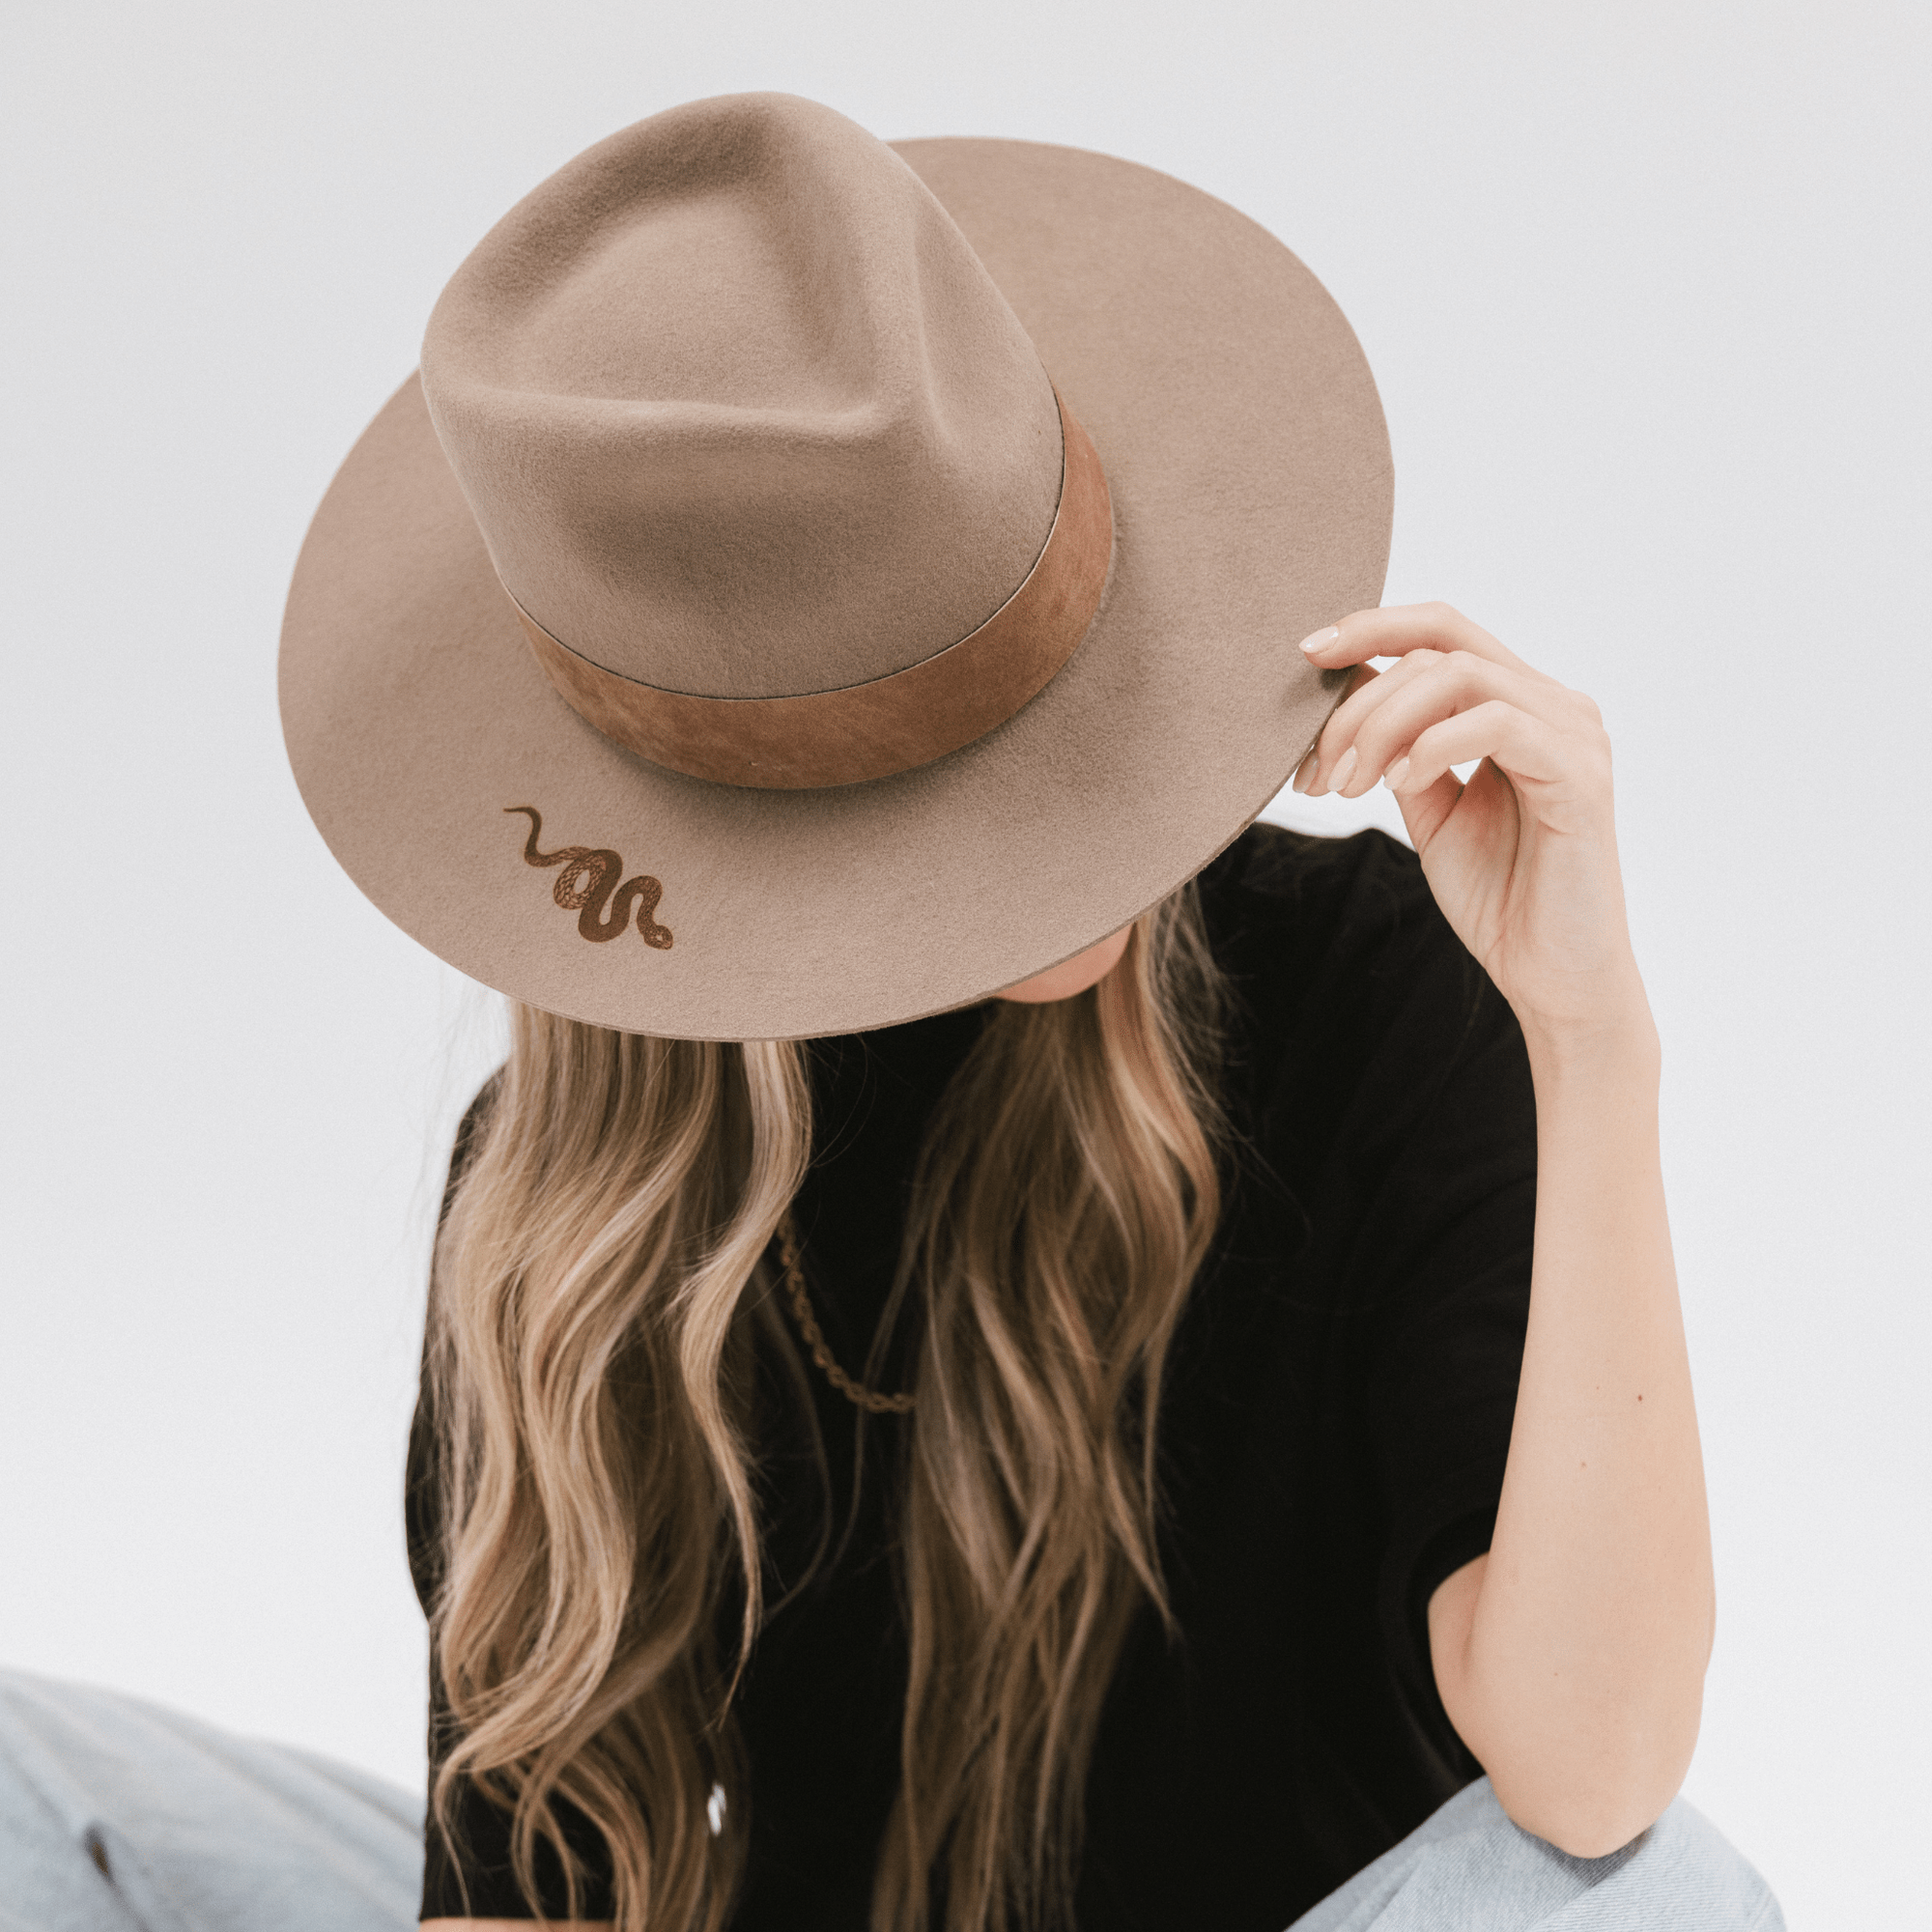 Gigi Pip felt limited edition hats for women - LE 31 - Miller teardrop fedora with tall front crown and a structured flat brim at the base with 2 hat color options + 3 hat burning detail options featuring a snake, moon + stars or a pair of butterflies [snake]